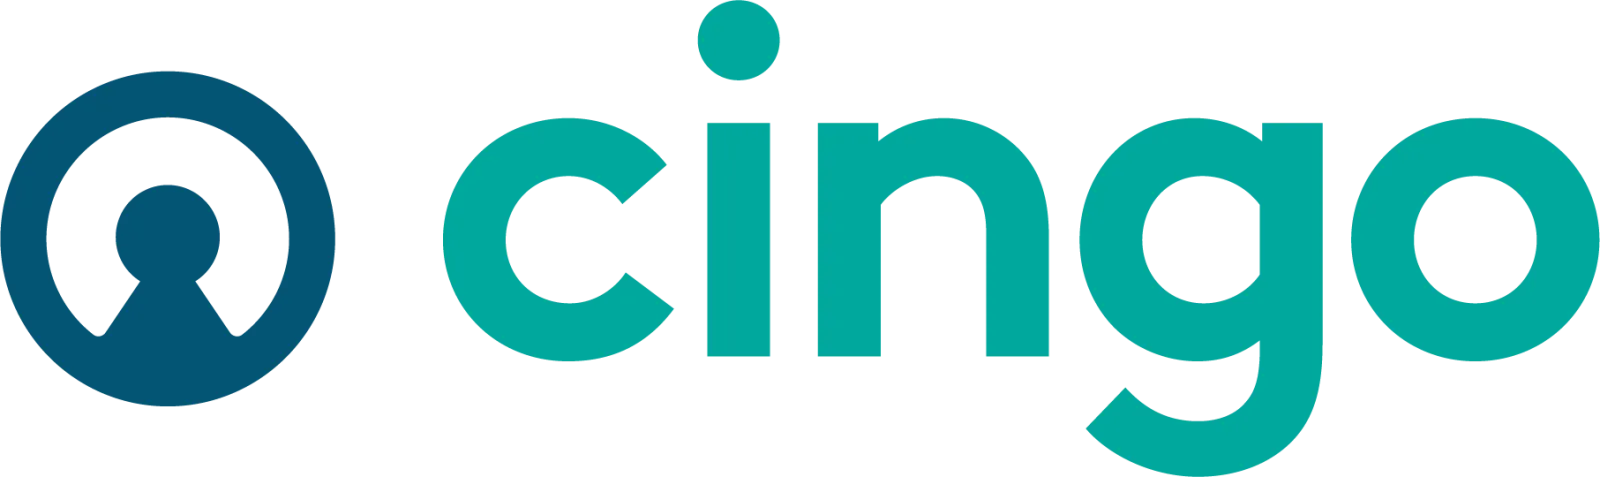 Cingo Honored as 2017 Best and Brightest Companies to Work For®